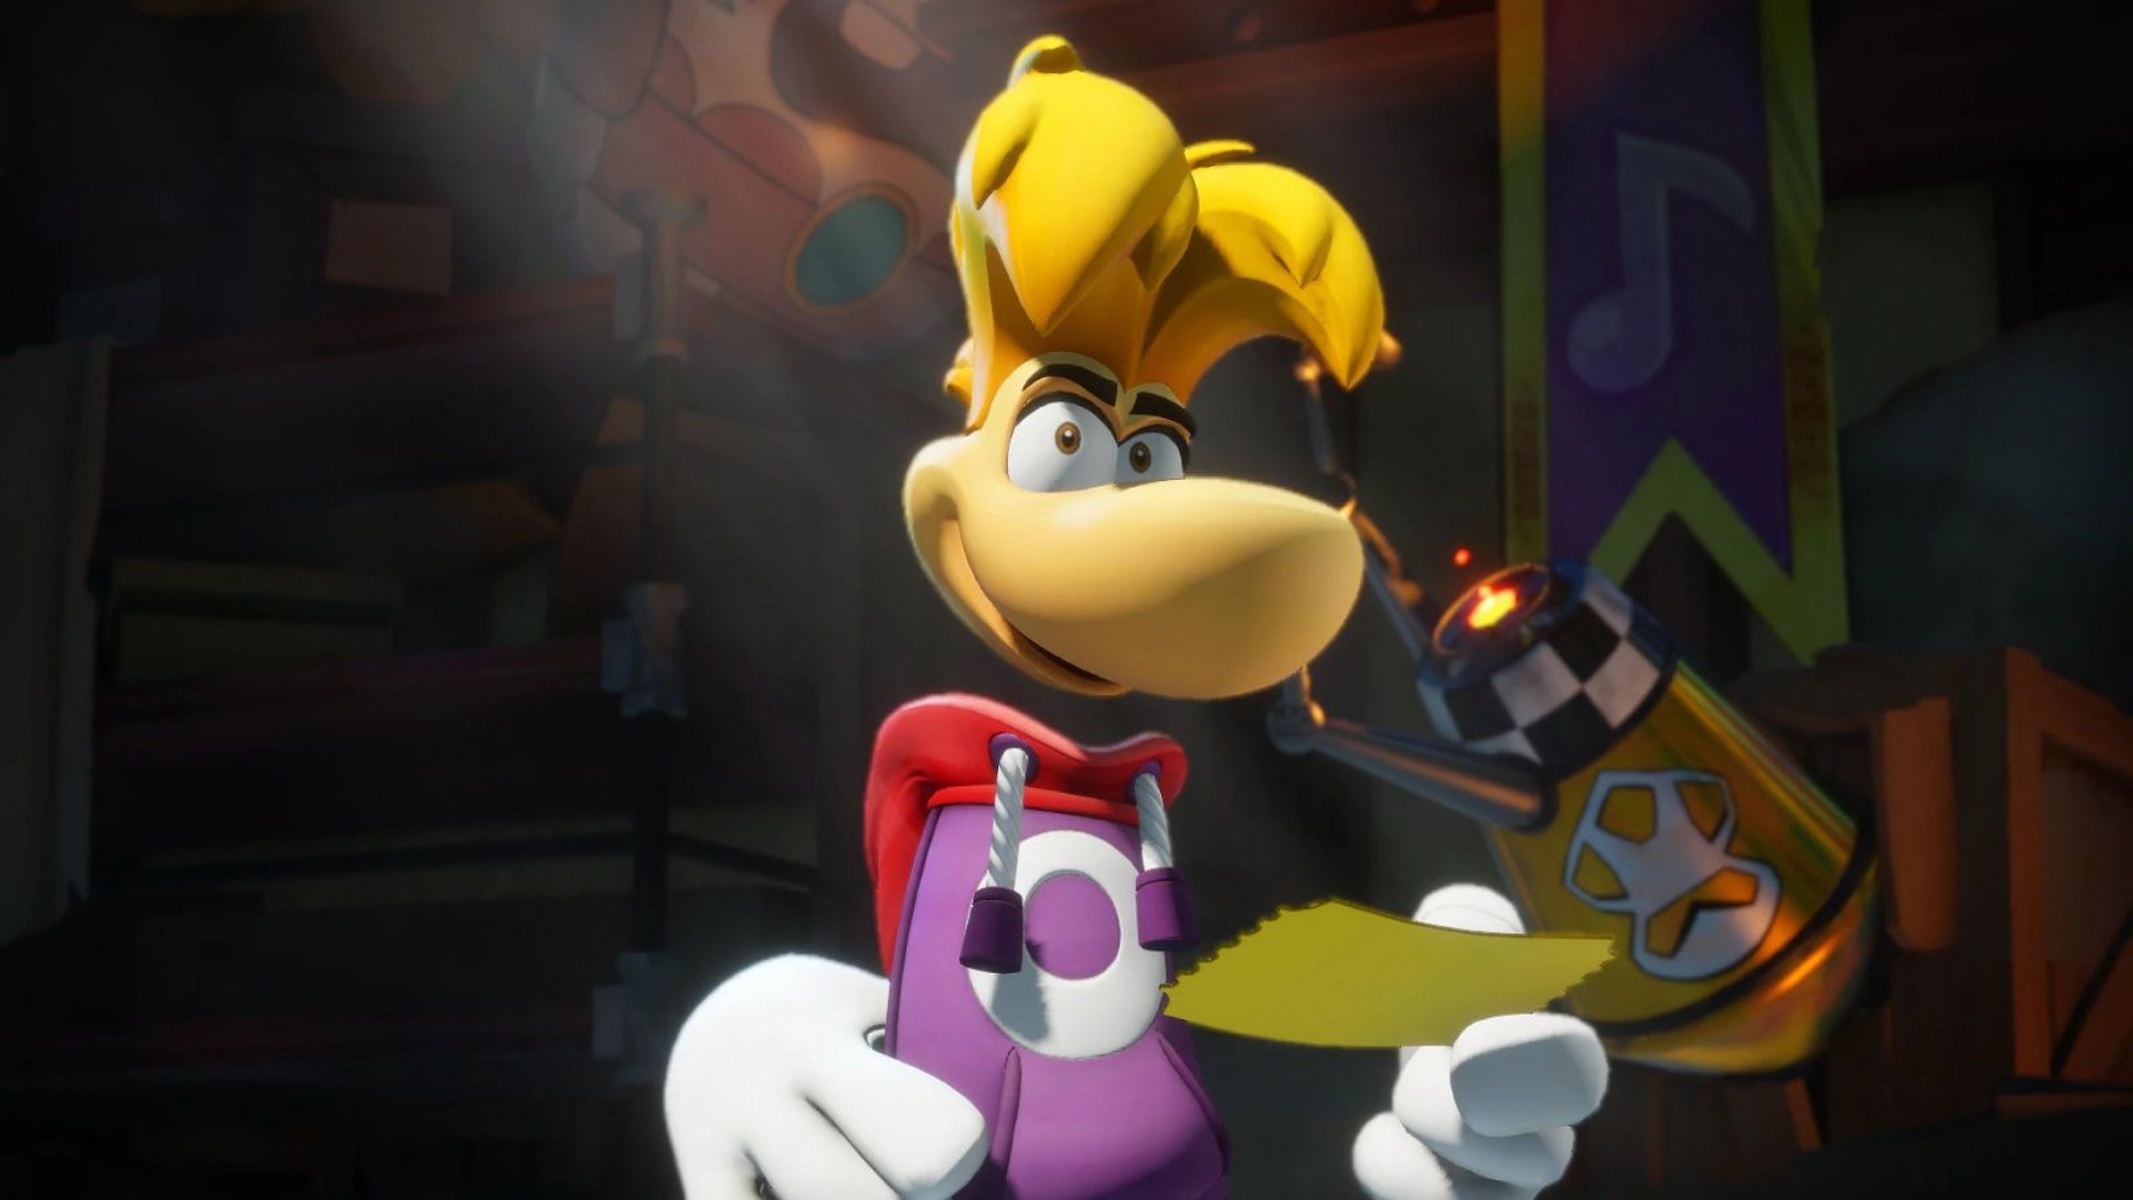 Rayman in Mario + Rabbids Sparks of Hope